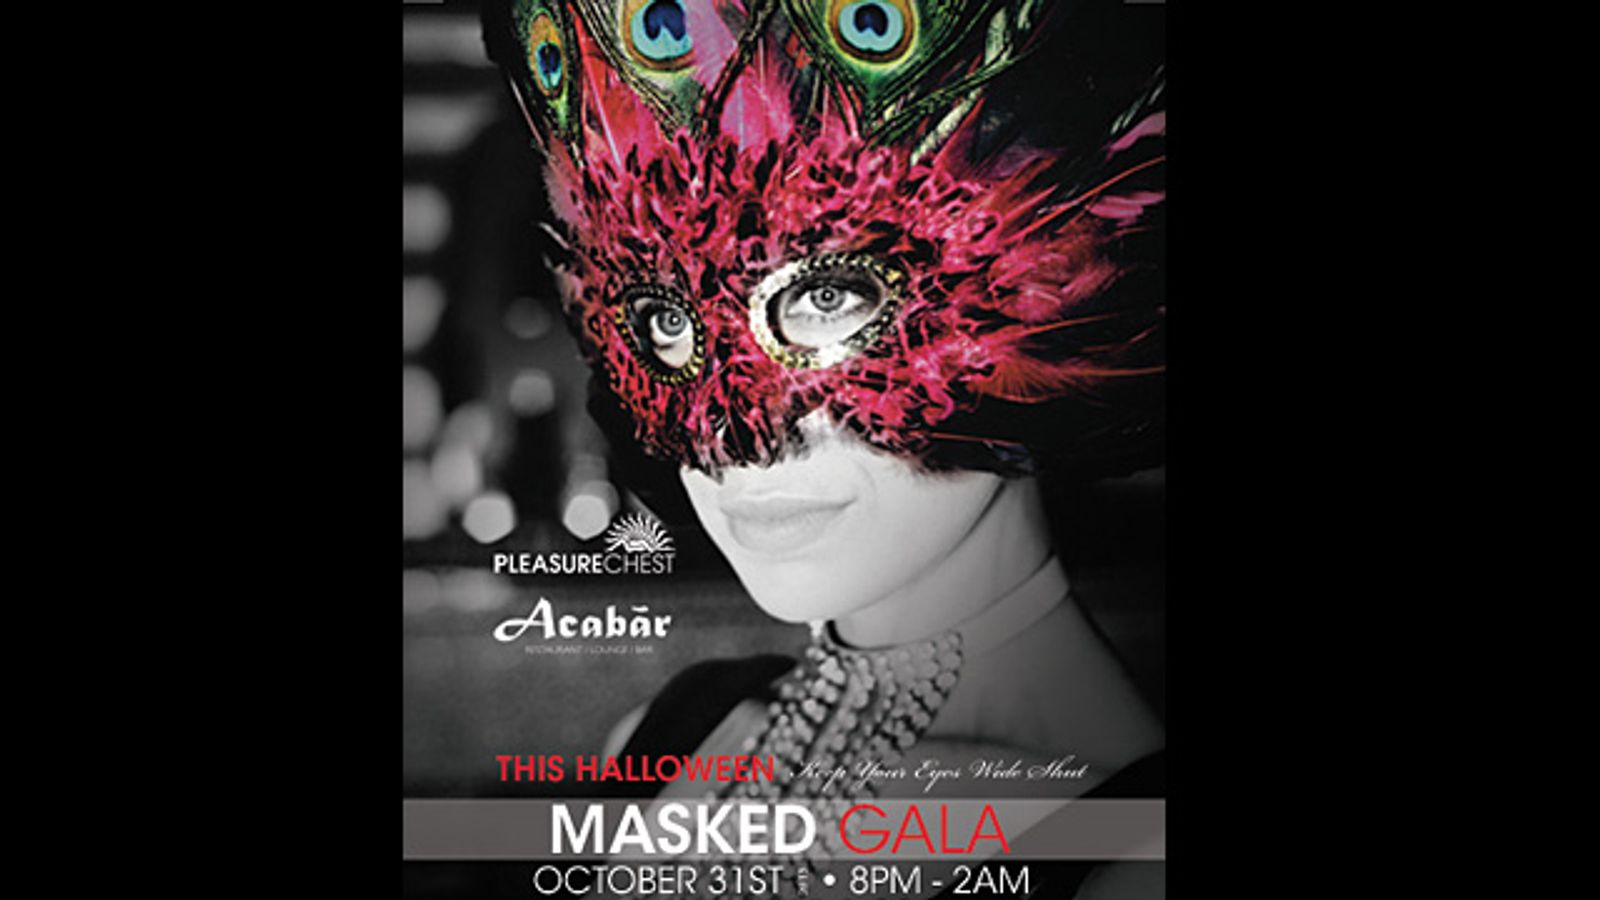 Pleasure Chest Teams With Acabàr for Halloween Masked Gala